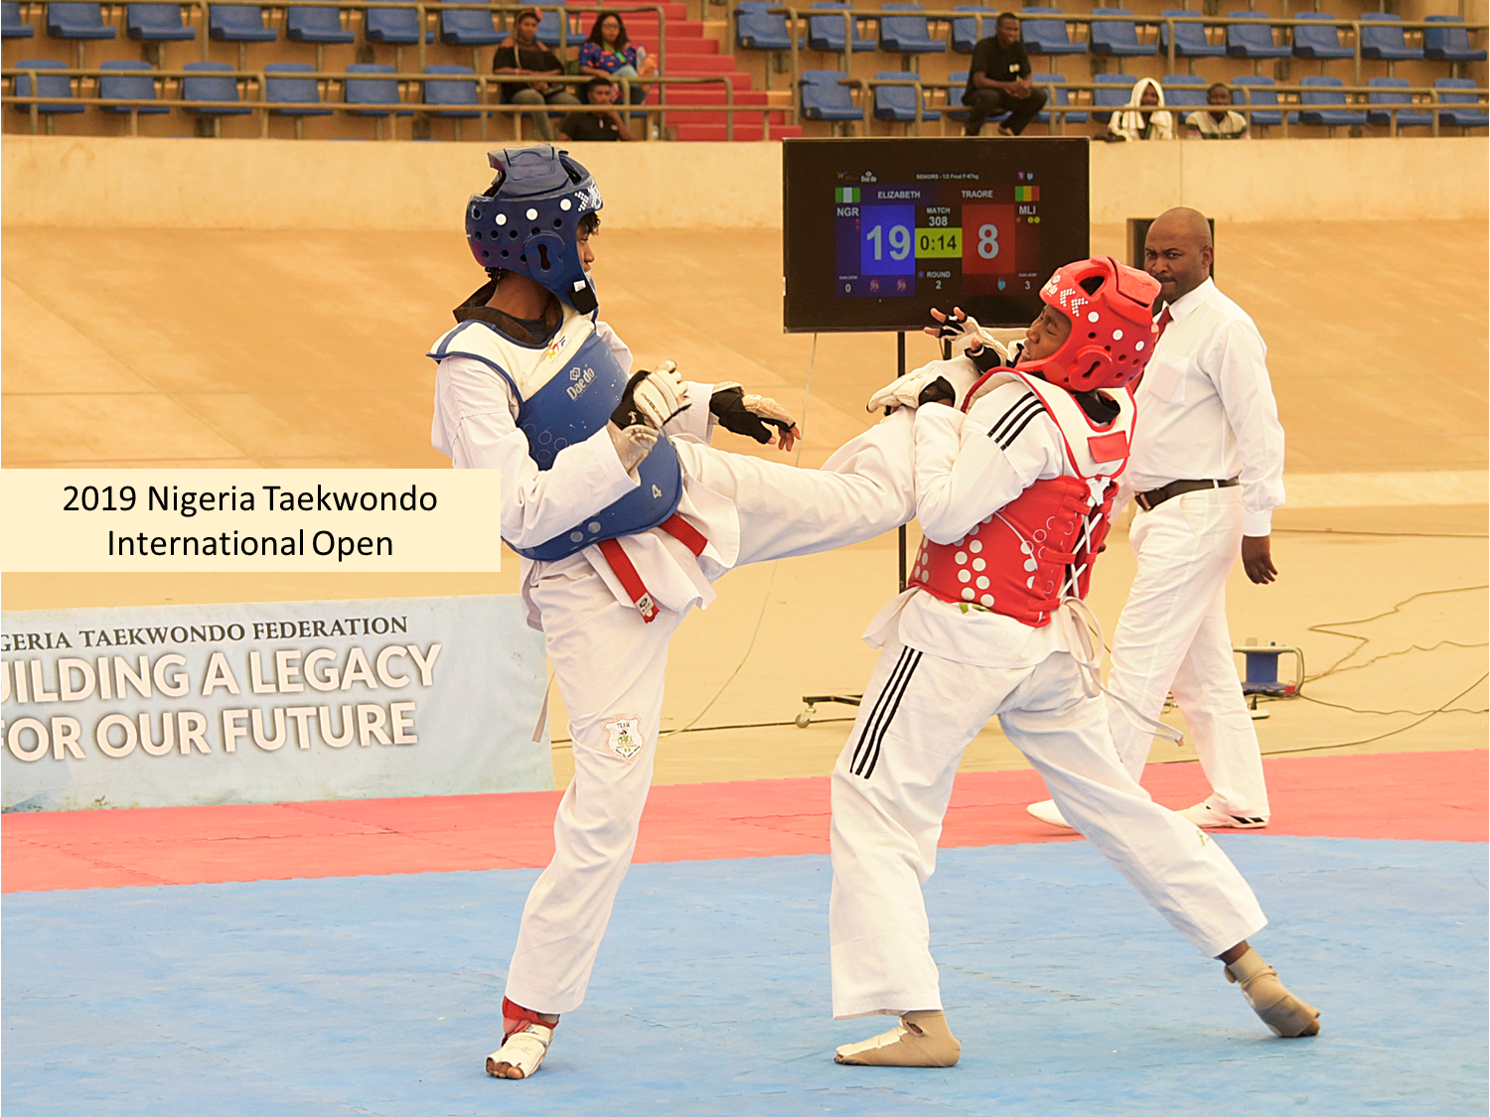 Nigerian taekwondo star included in Malala Fund's Game Changers project